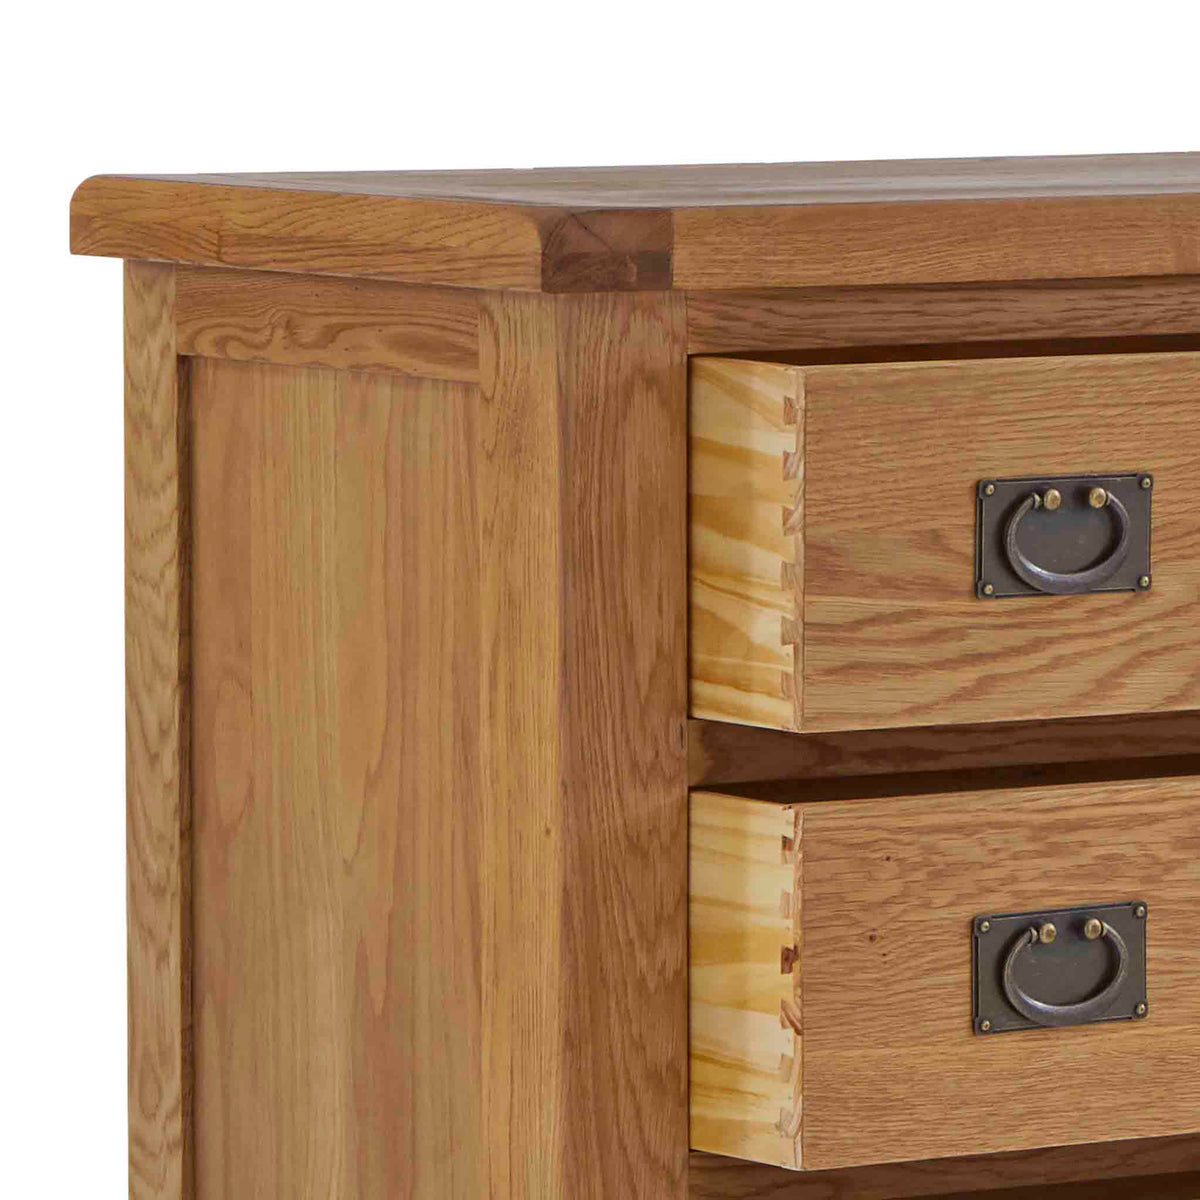 Zelah Oak 5 Drawer Chest of Drawers - Drawers open showing dovetail joints